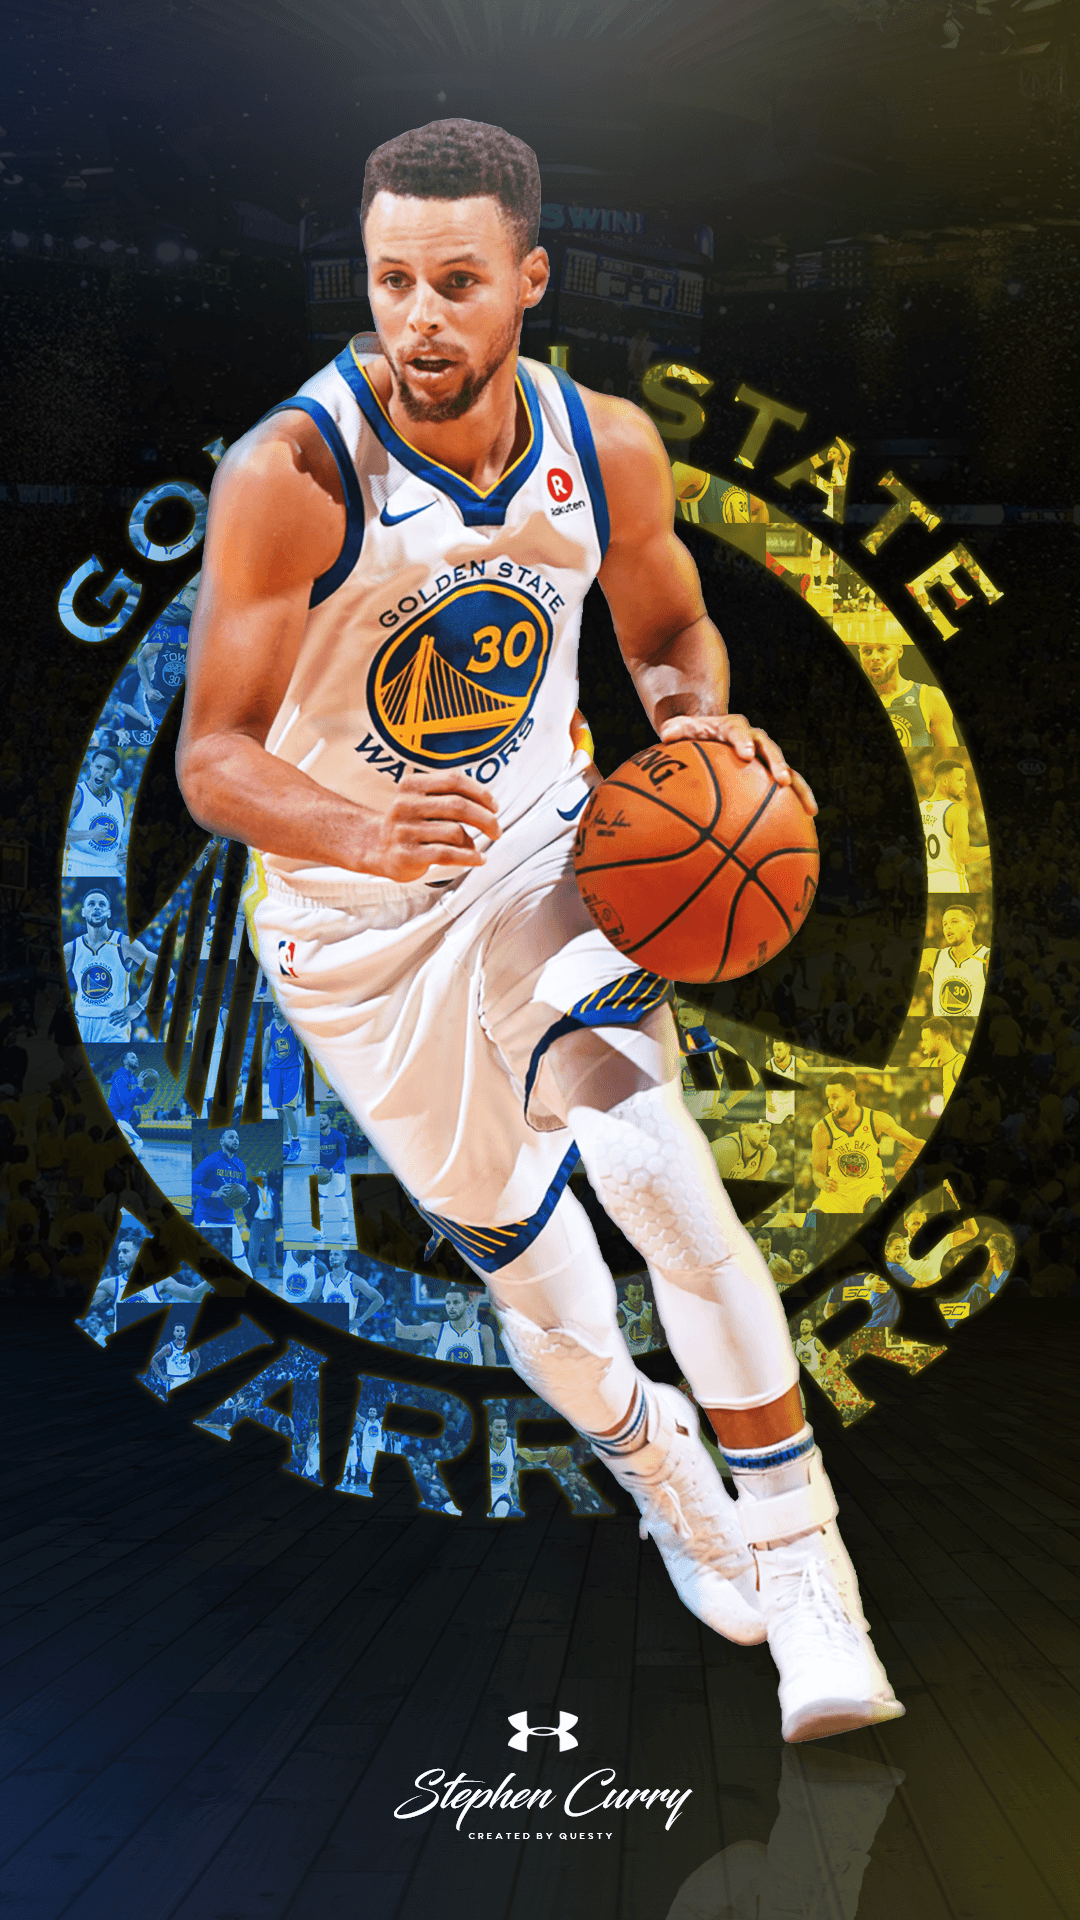 stephen curry fan page on Instagram Awesome edit by neovisuals follow me  for more cur  Nba stephen curry Stephen curry wallpaper Nba wallpapers  stephen curry